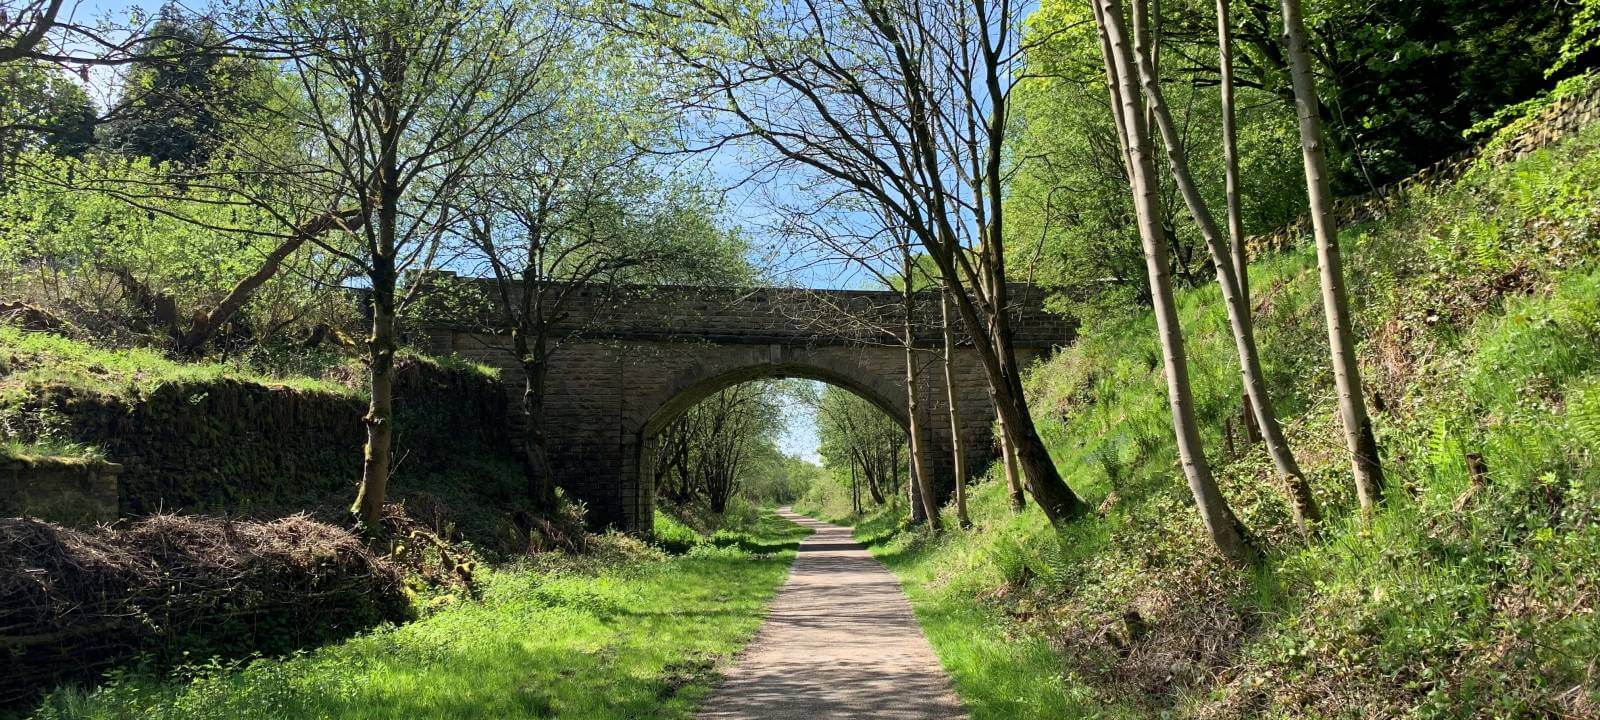 Try these walking routes in South Yorkshire